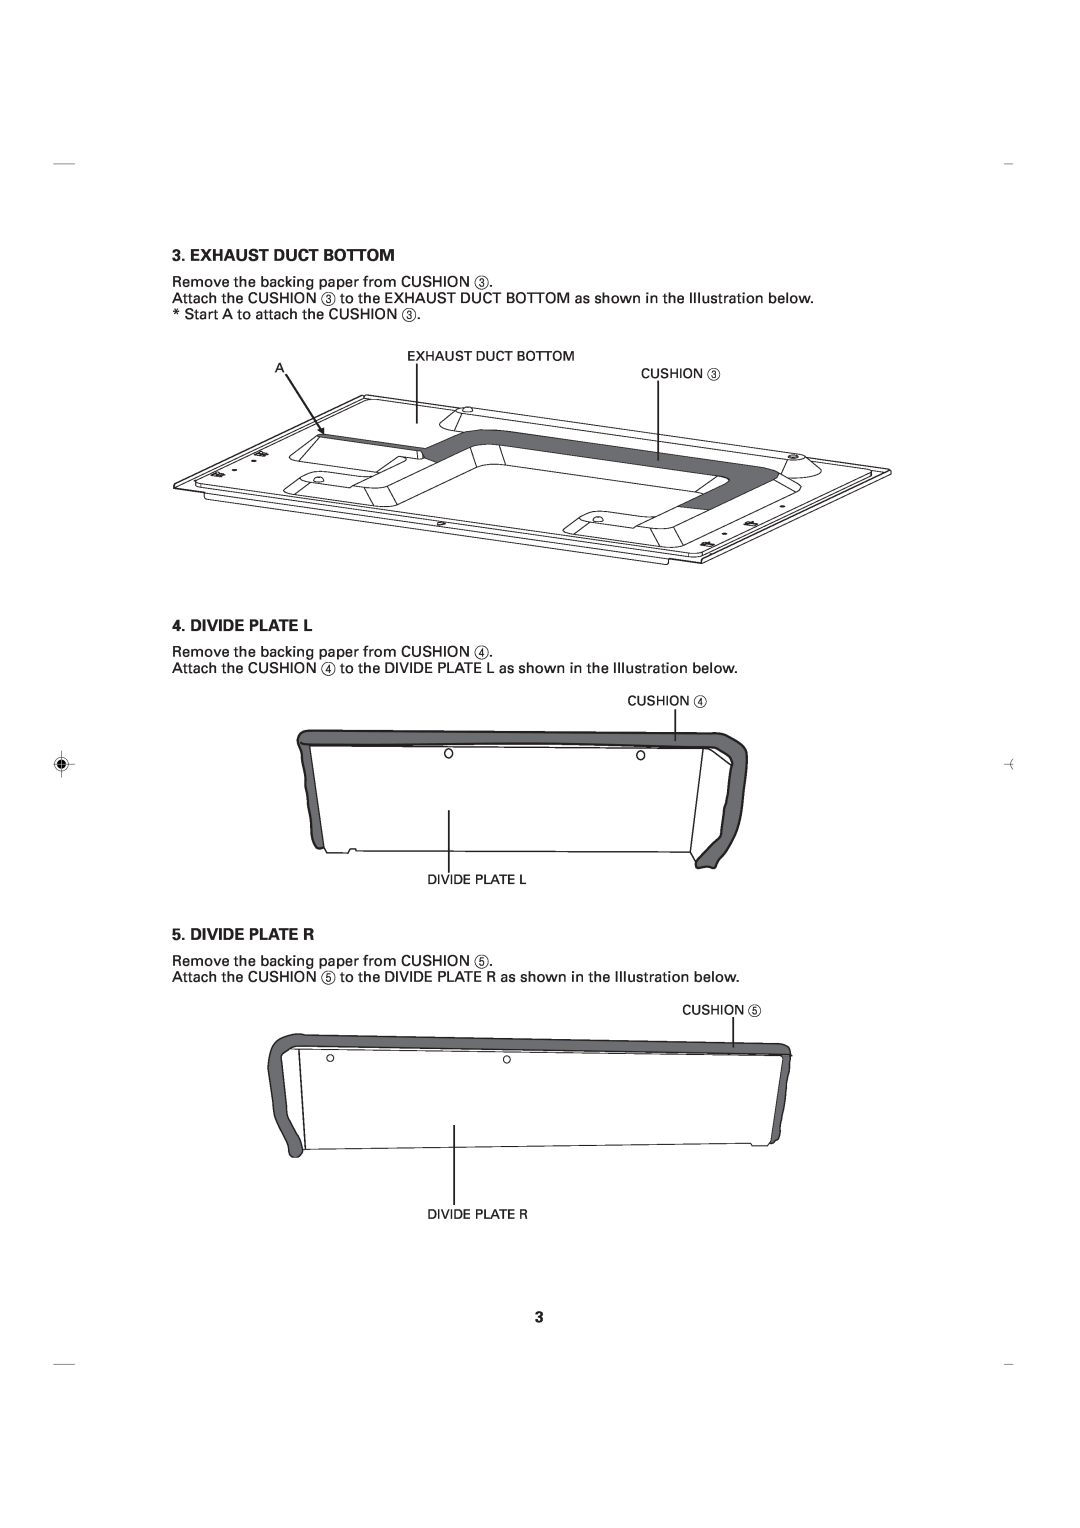 Sharp RK-12S30 installation instructions Exhaust Duct Bottom, Divide Plate L, Divide Plate R 